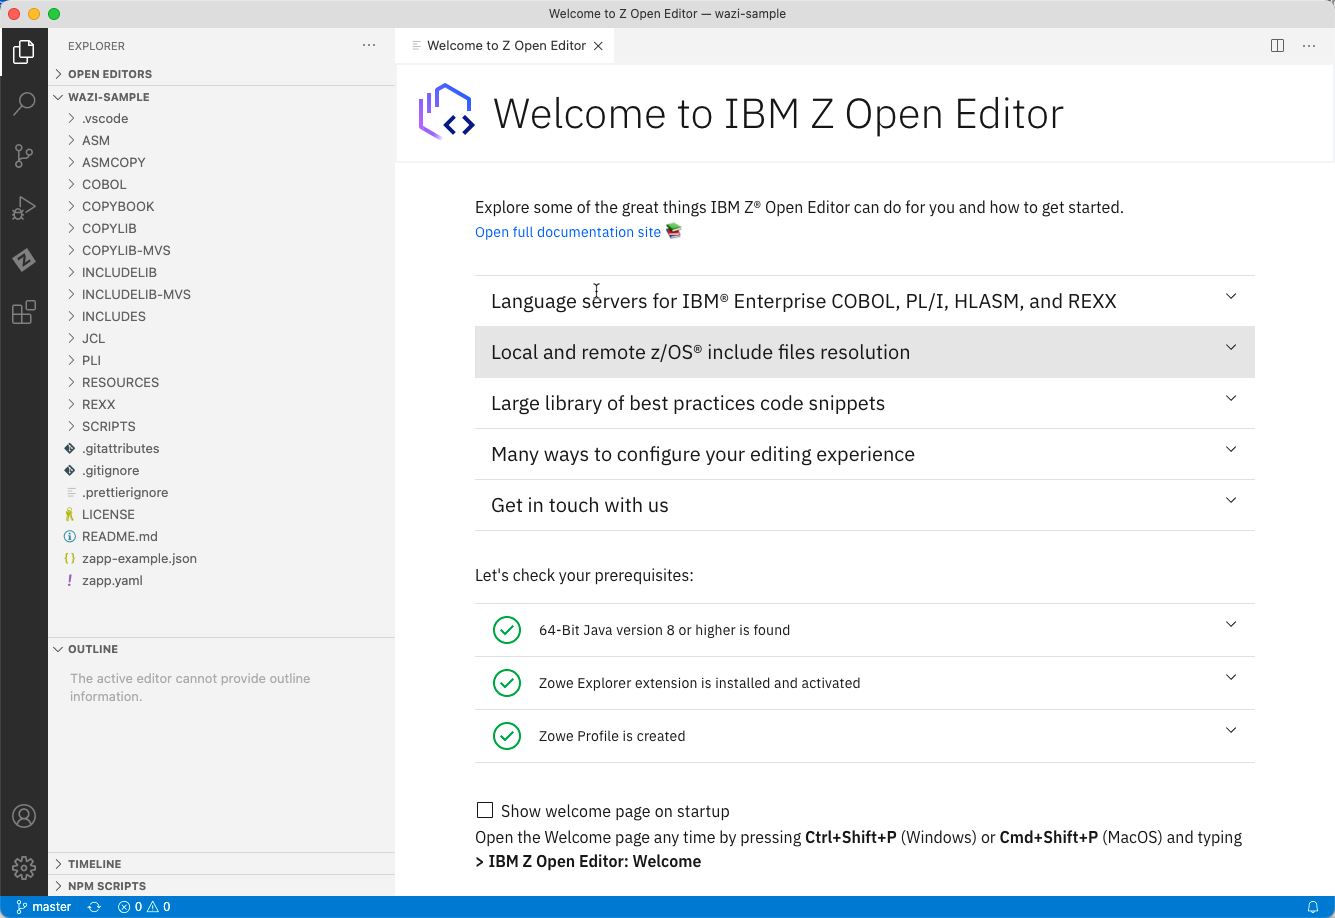 Z Open Editor Welcome page